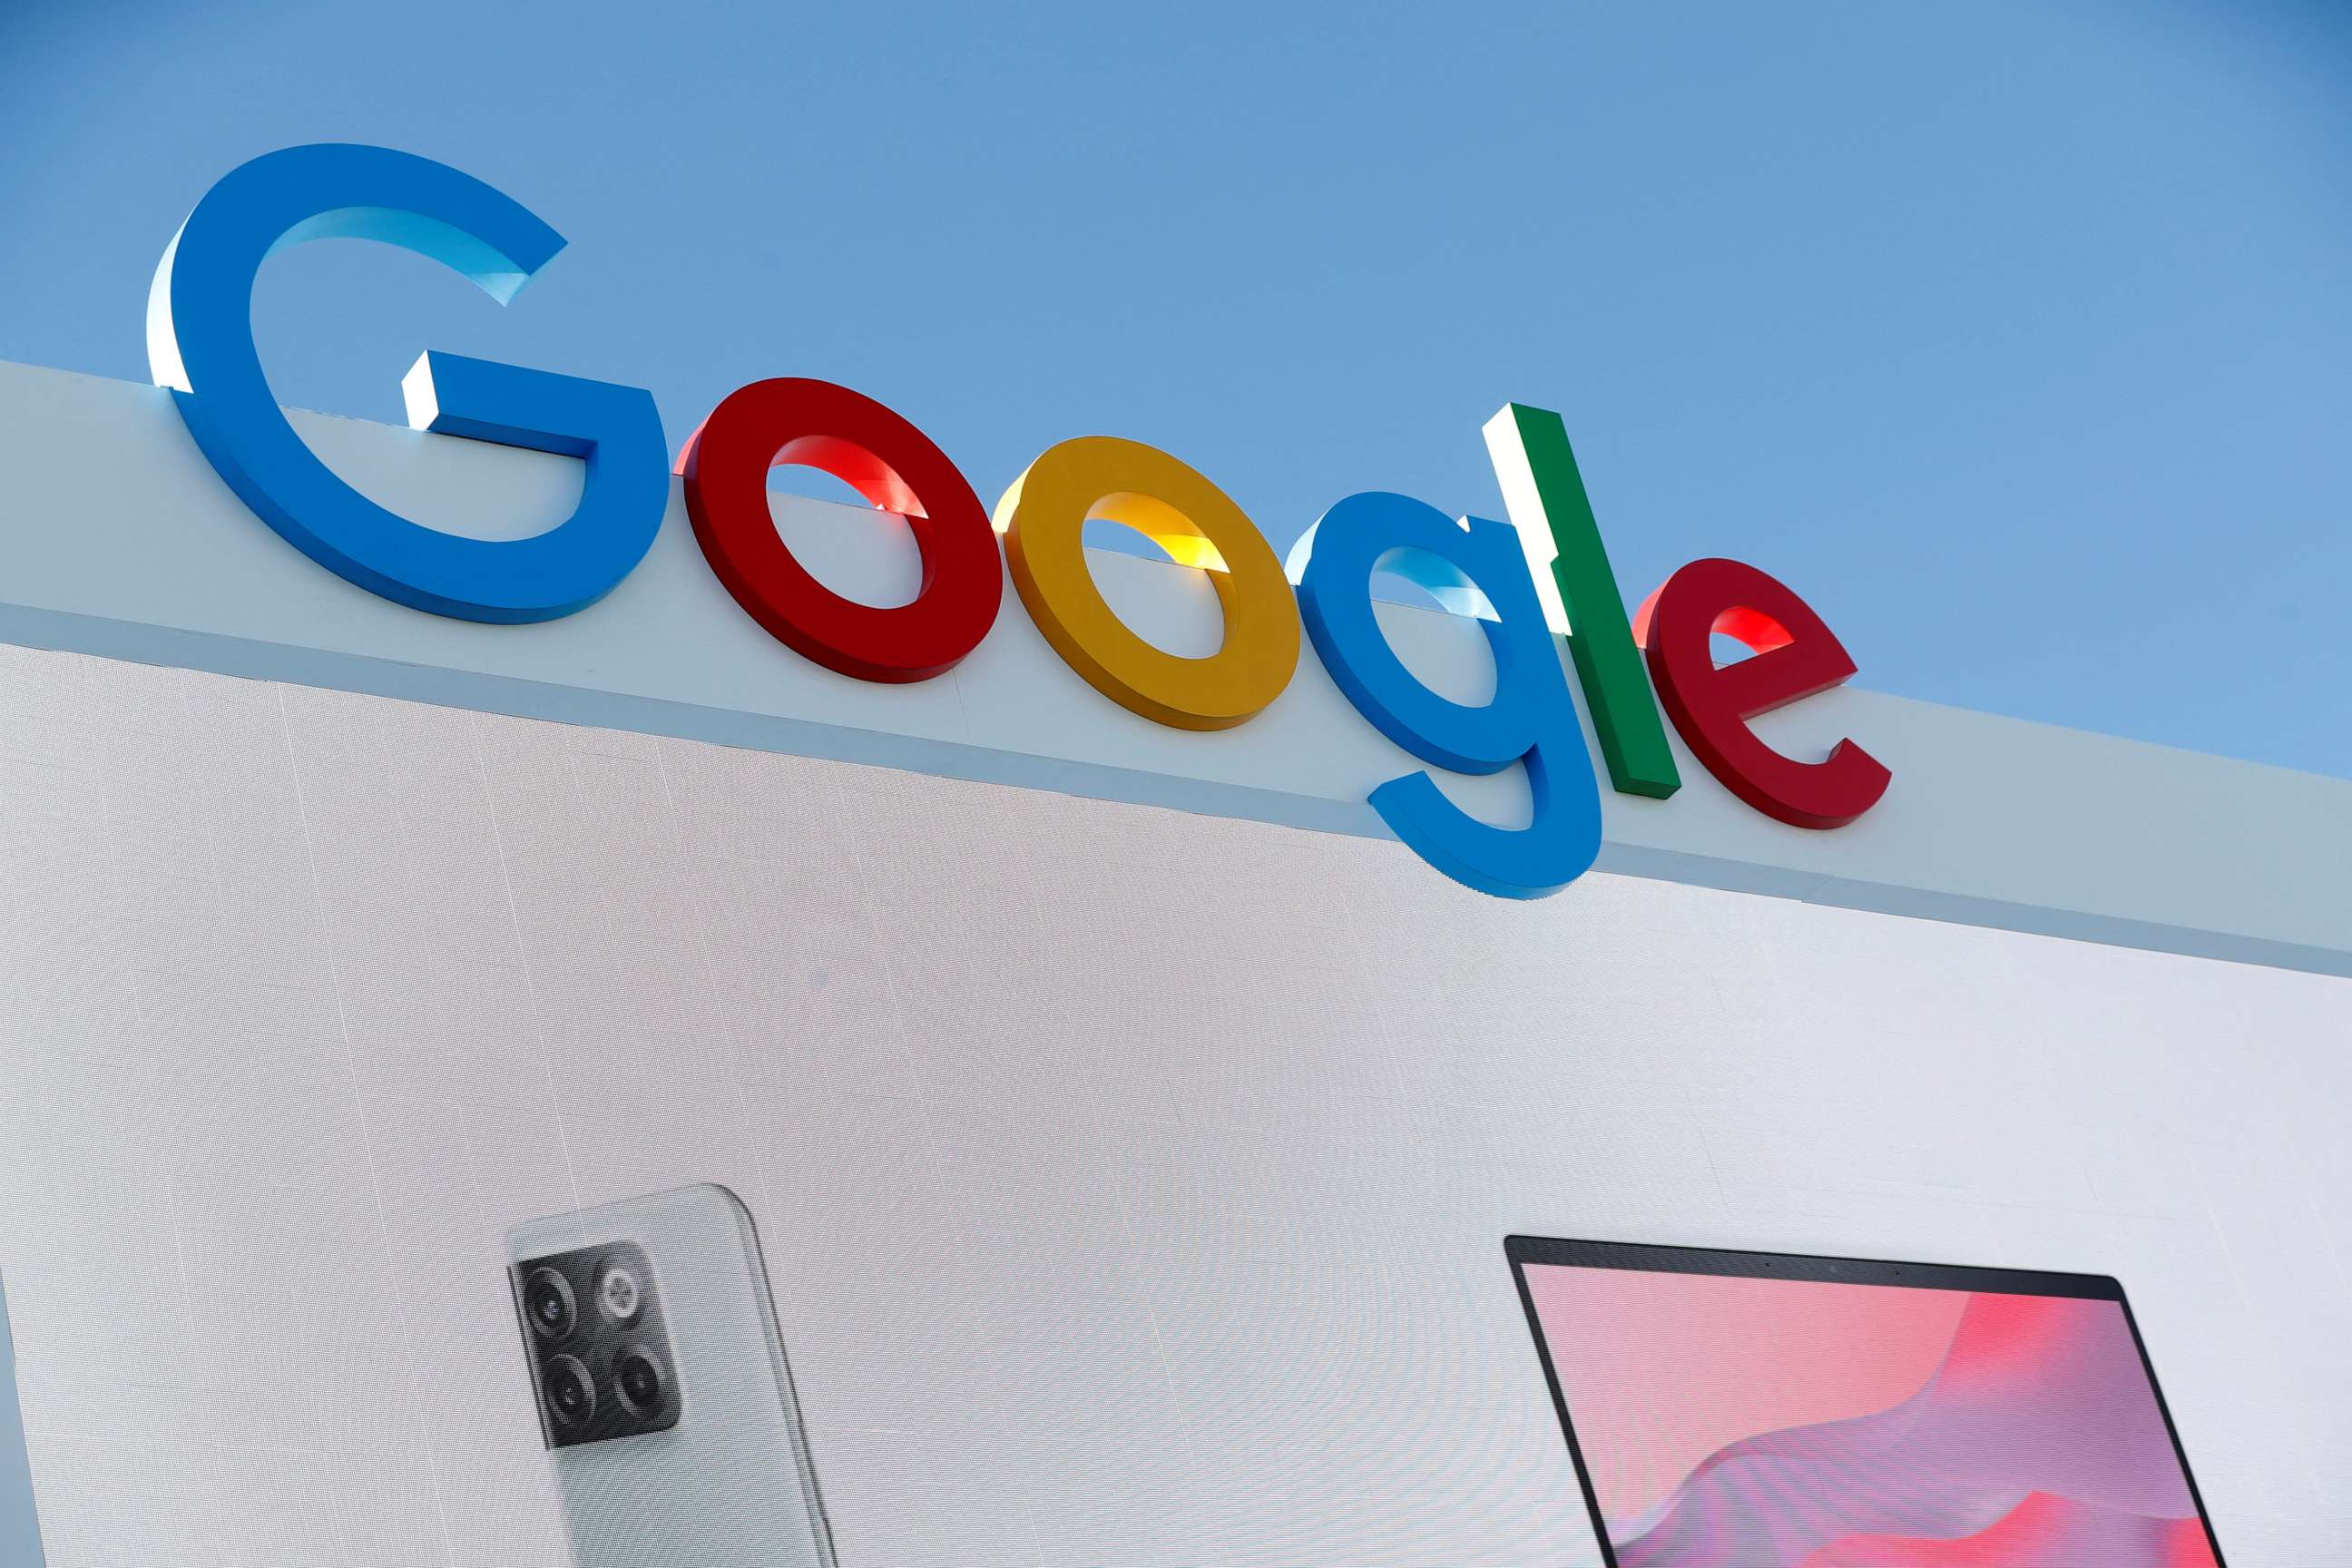 PHOTO: A view of the Google logo on a temporary house during CES 2023, an annual consumer electronics trade show, in Las Vegas, Jan. 6, 2023.